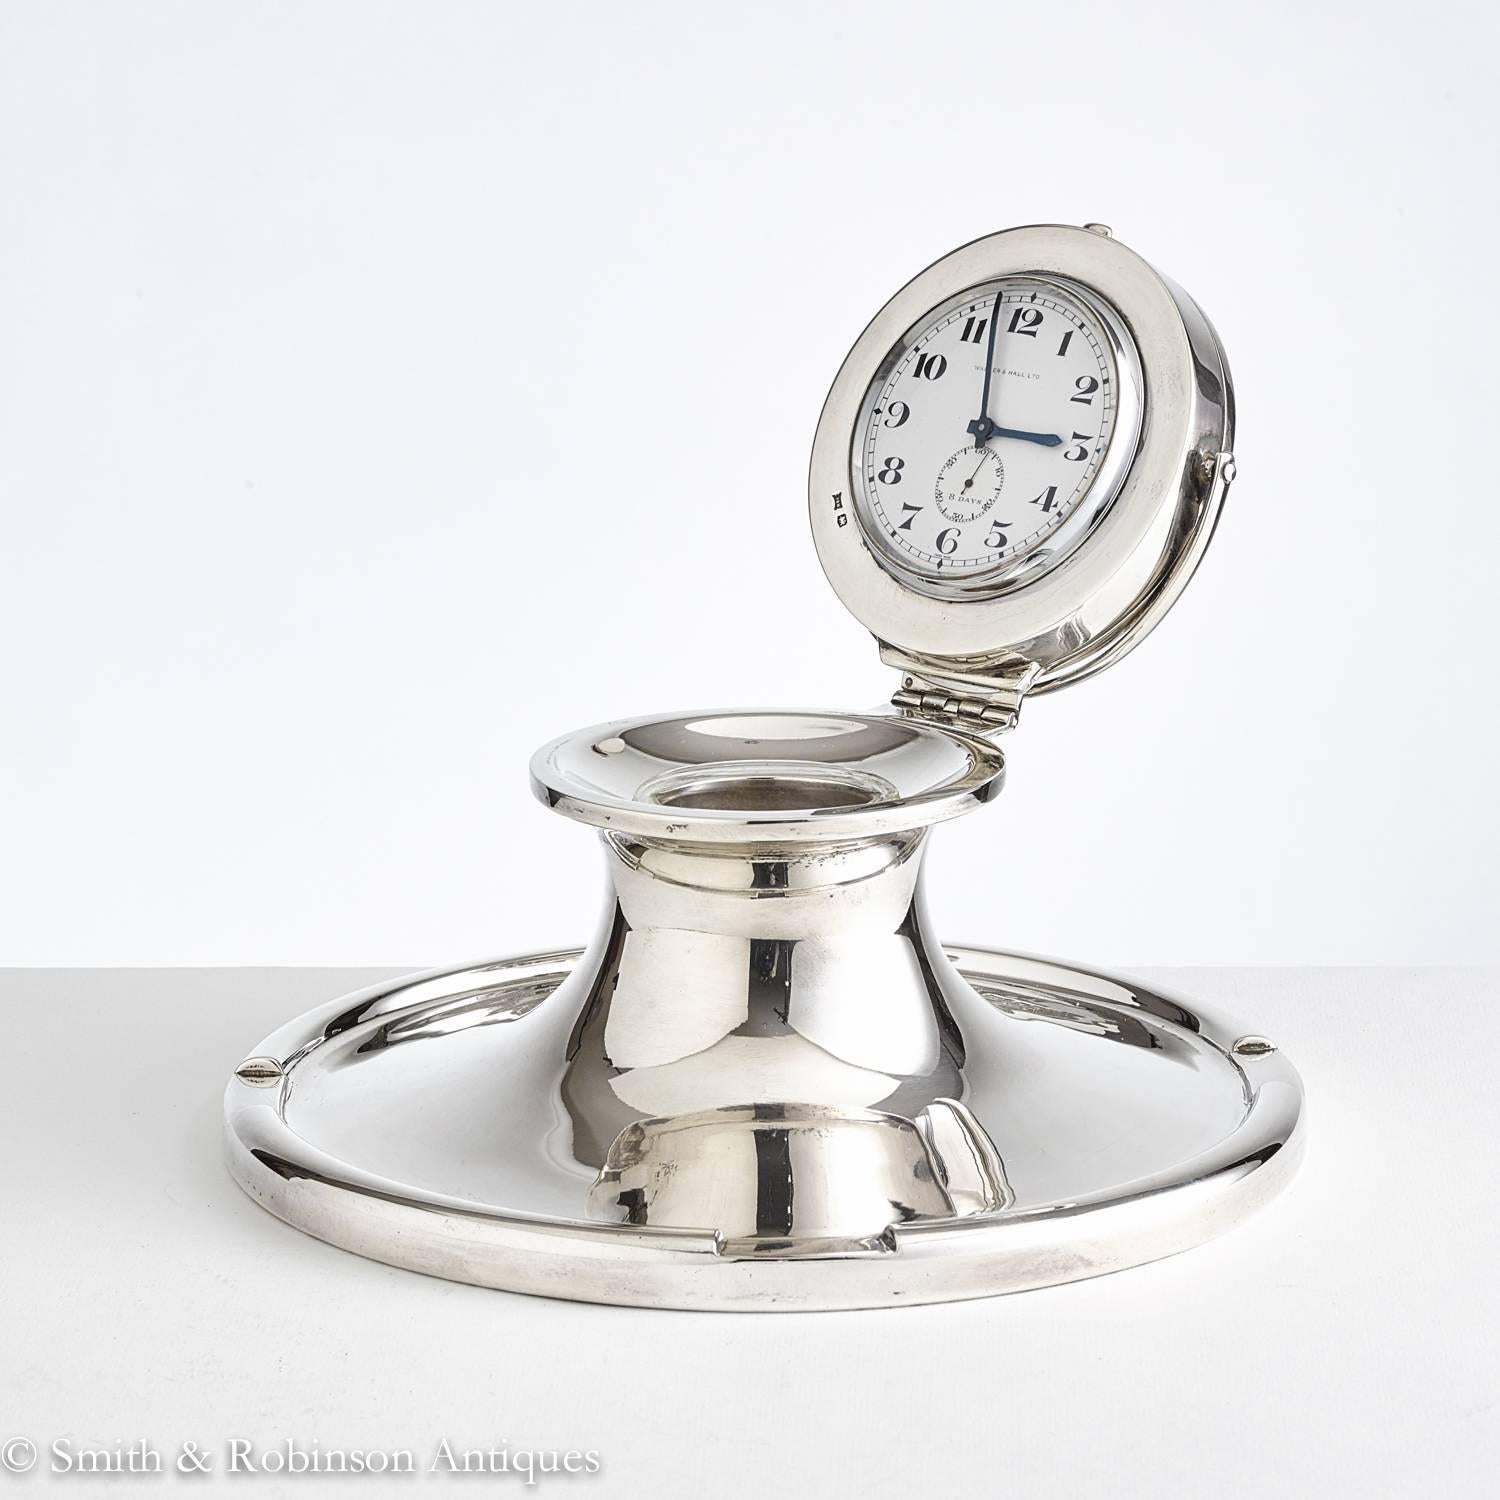 Large early 20th Century Nautical Capstan clock inkwell, dated 1914 maker Walker & Hall.
The clock face can be shown in two different positions open or closed. 
Alternatively, if preferred, it can be closed with the clock face hidden.
There is a